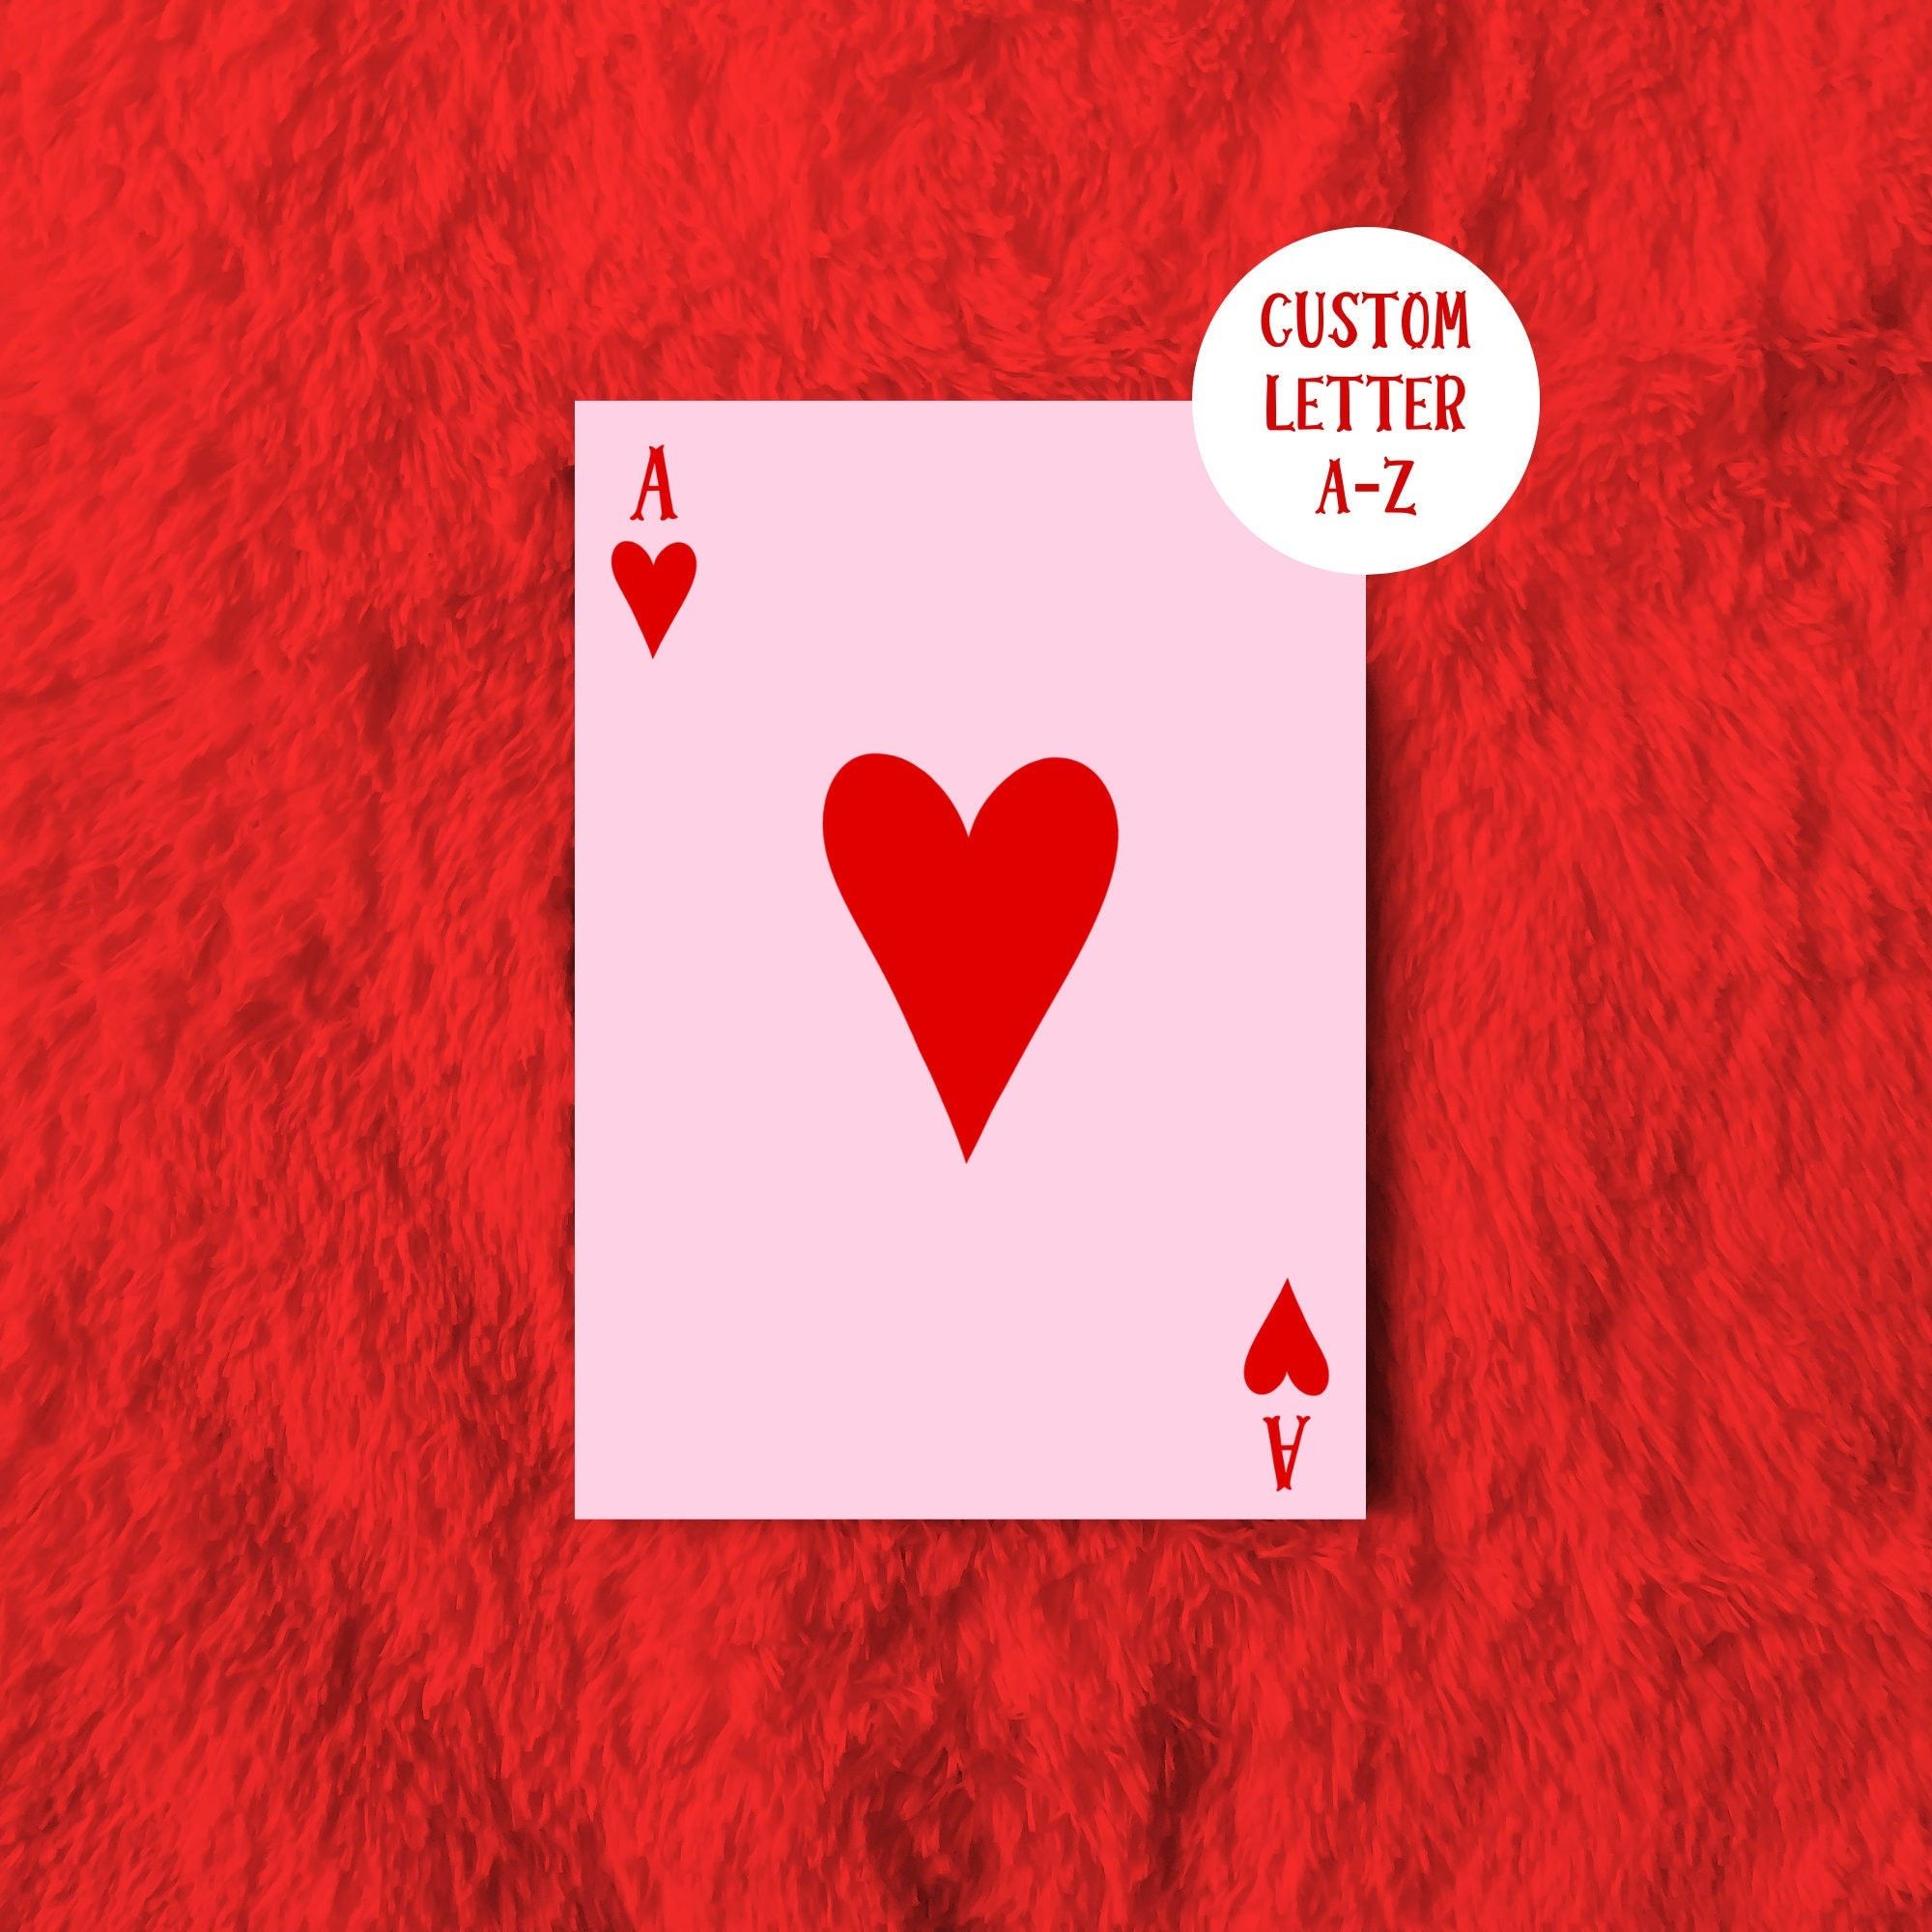 Ace of hearts playing card on a red background - Lovecore